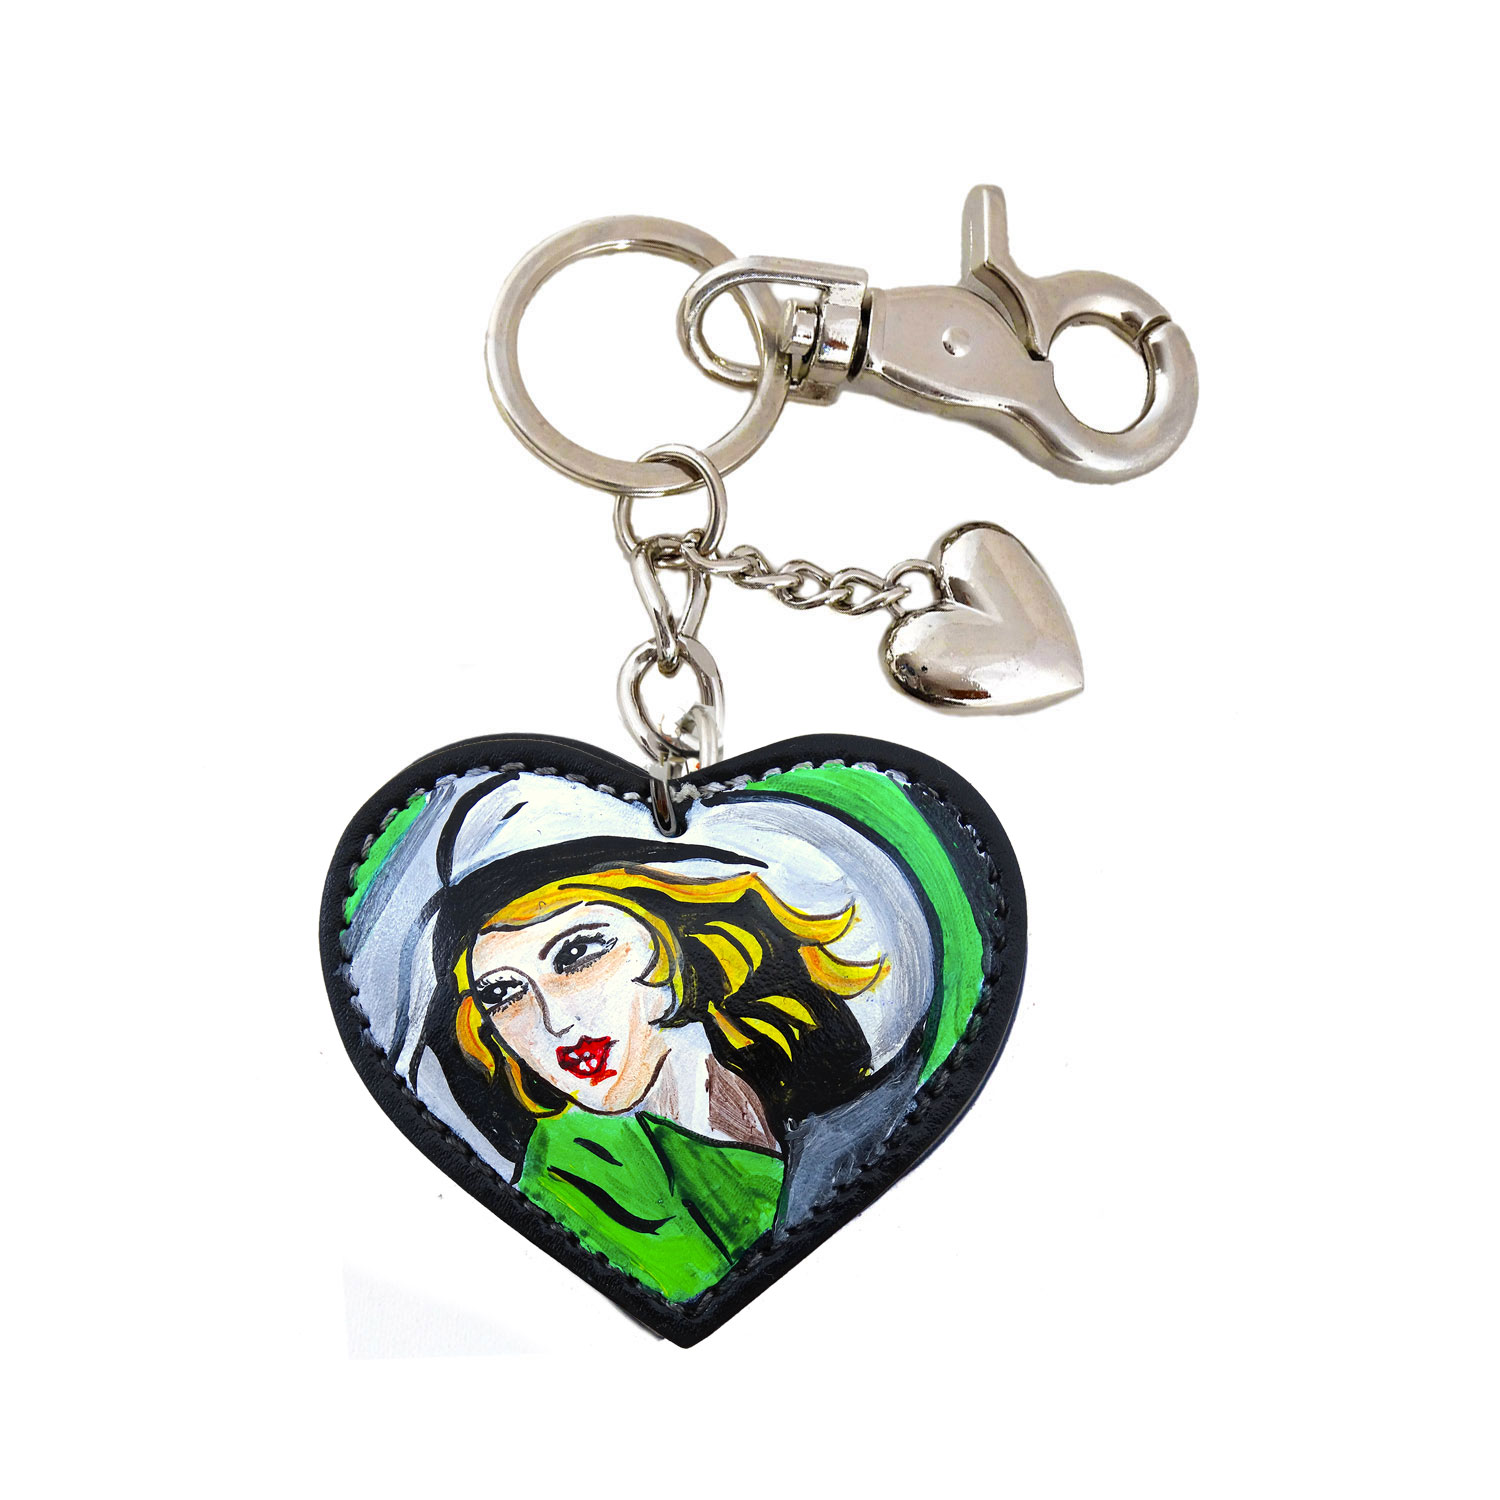 Hand painted keychain – Girl in Green with Gloves by De Lempicka